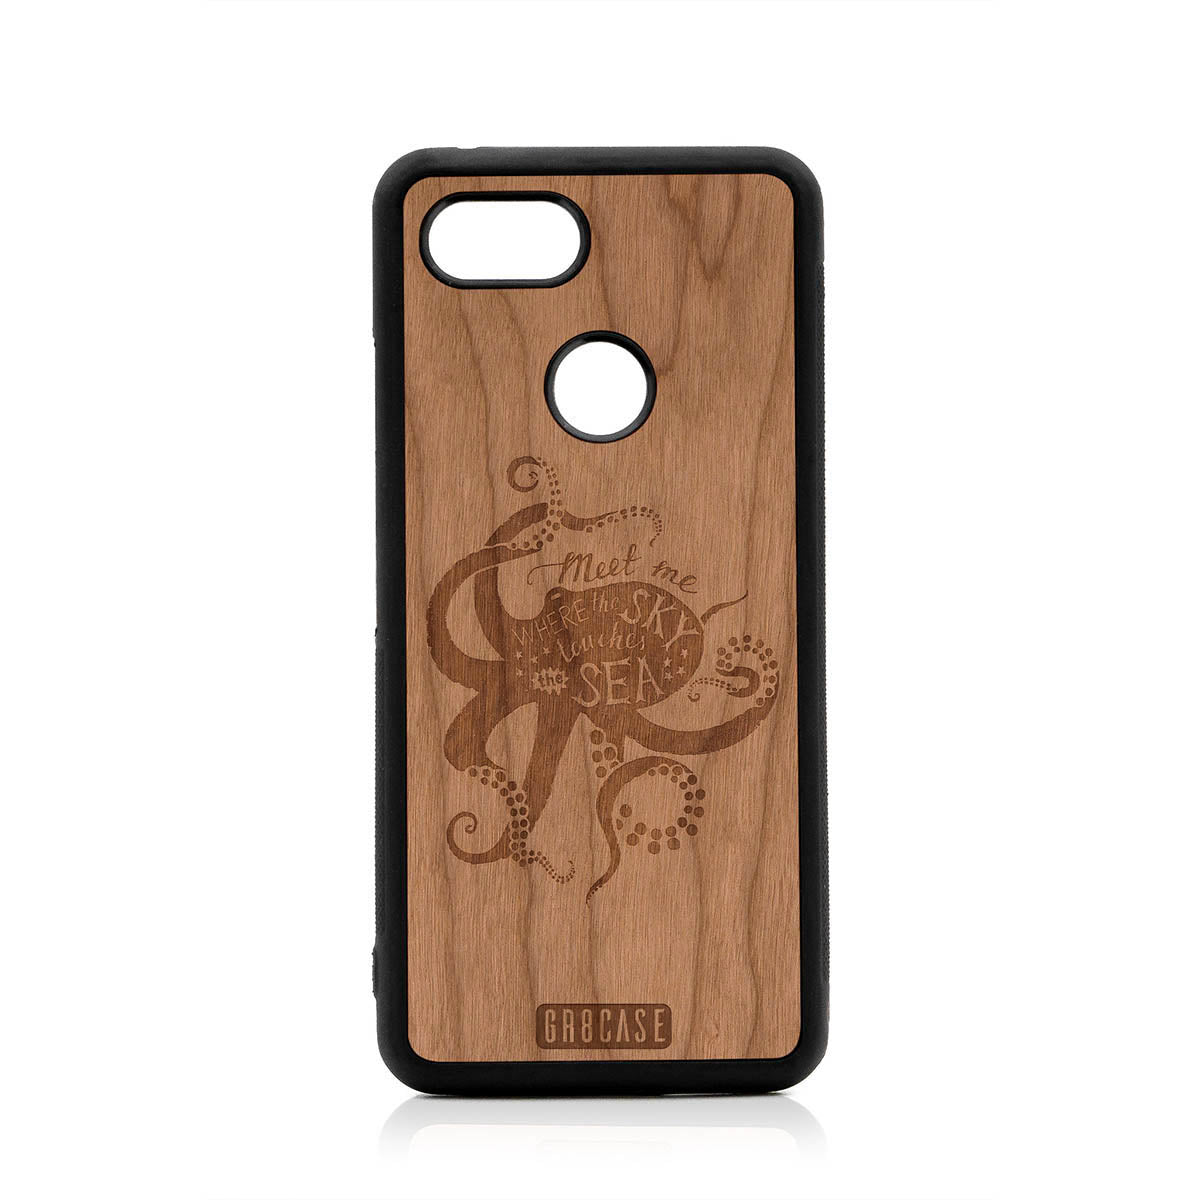 Meet Me Where The Sky Touches The Sea (Octopus) Design Wood Case For Google Pixel 3